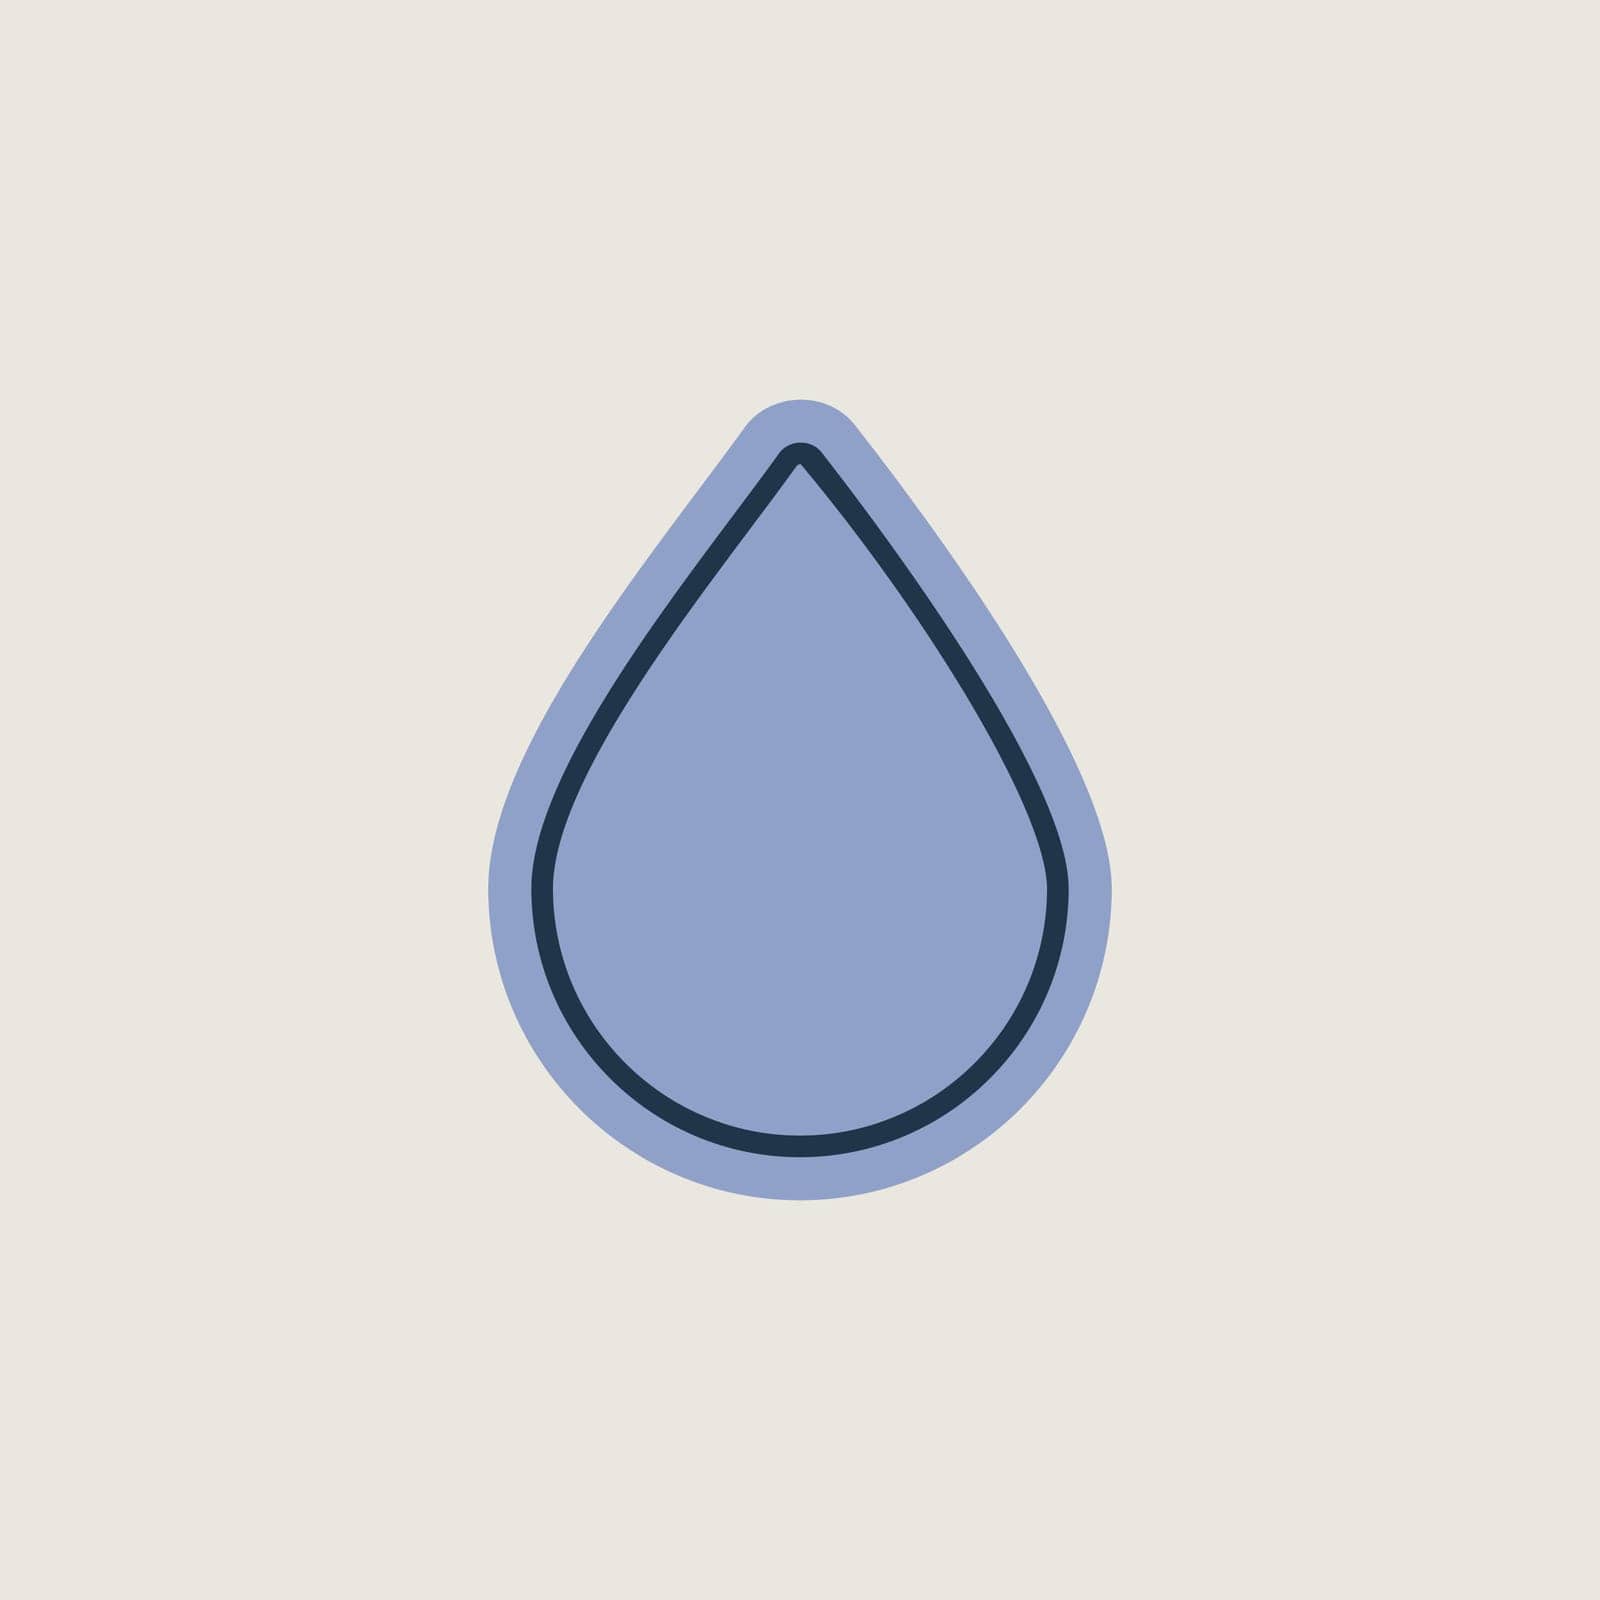 Drop water vector icon. Meteorology sign. Graph symbol for travel, tourism and weather web site and apps design, logo, app, UI